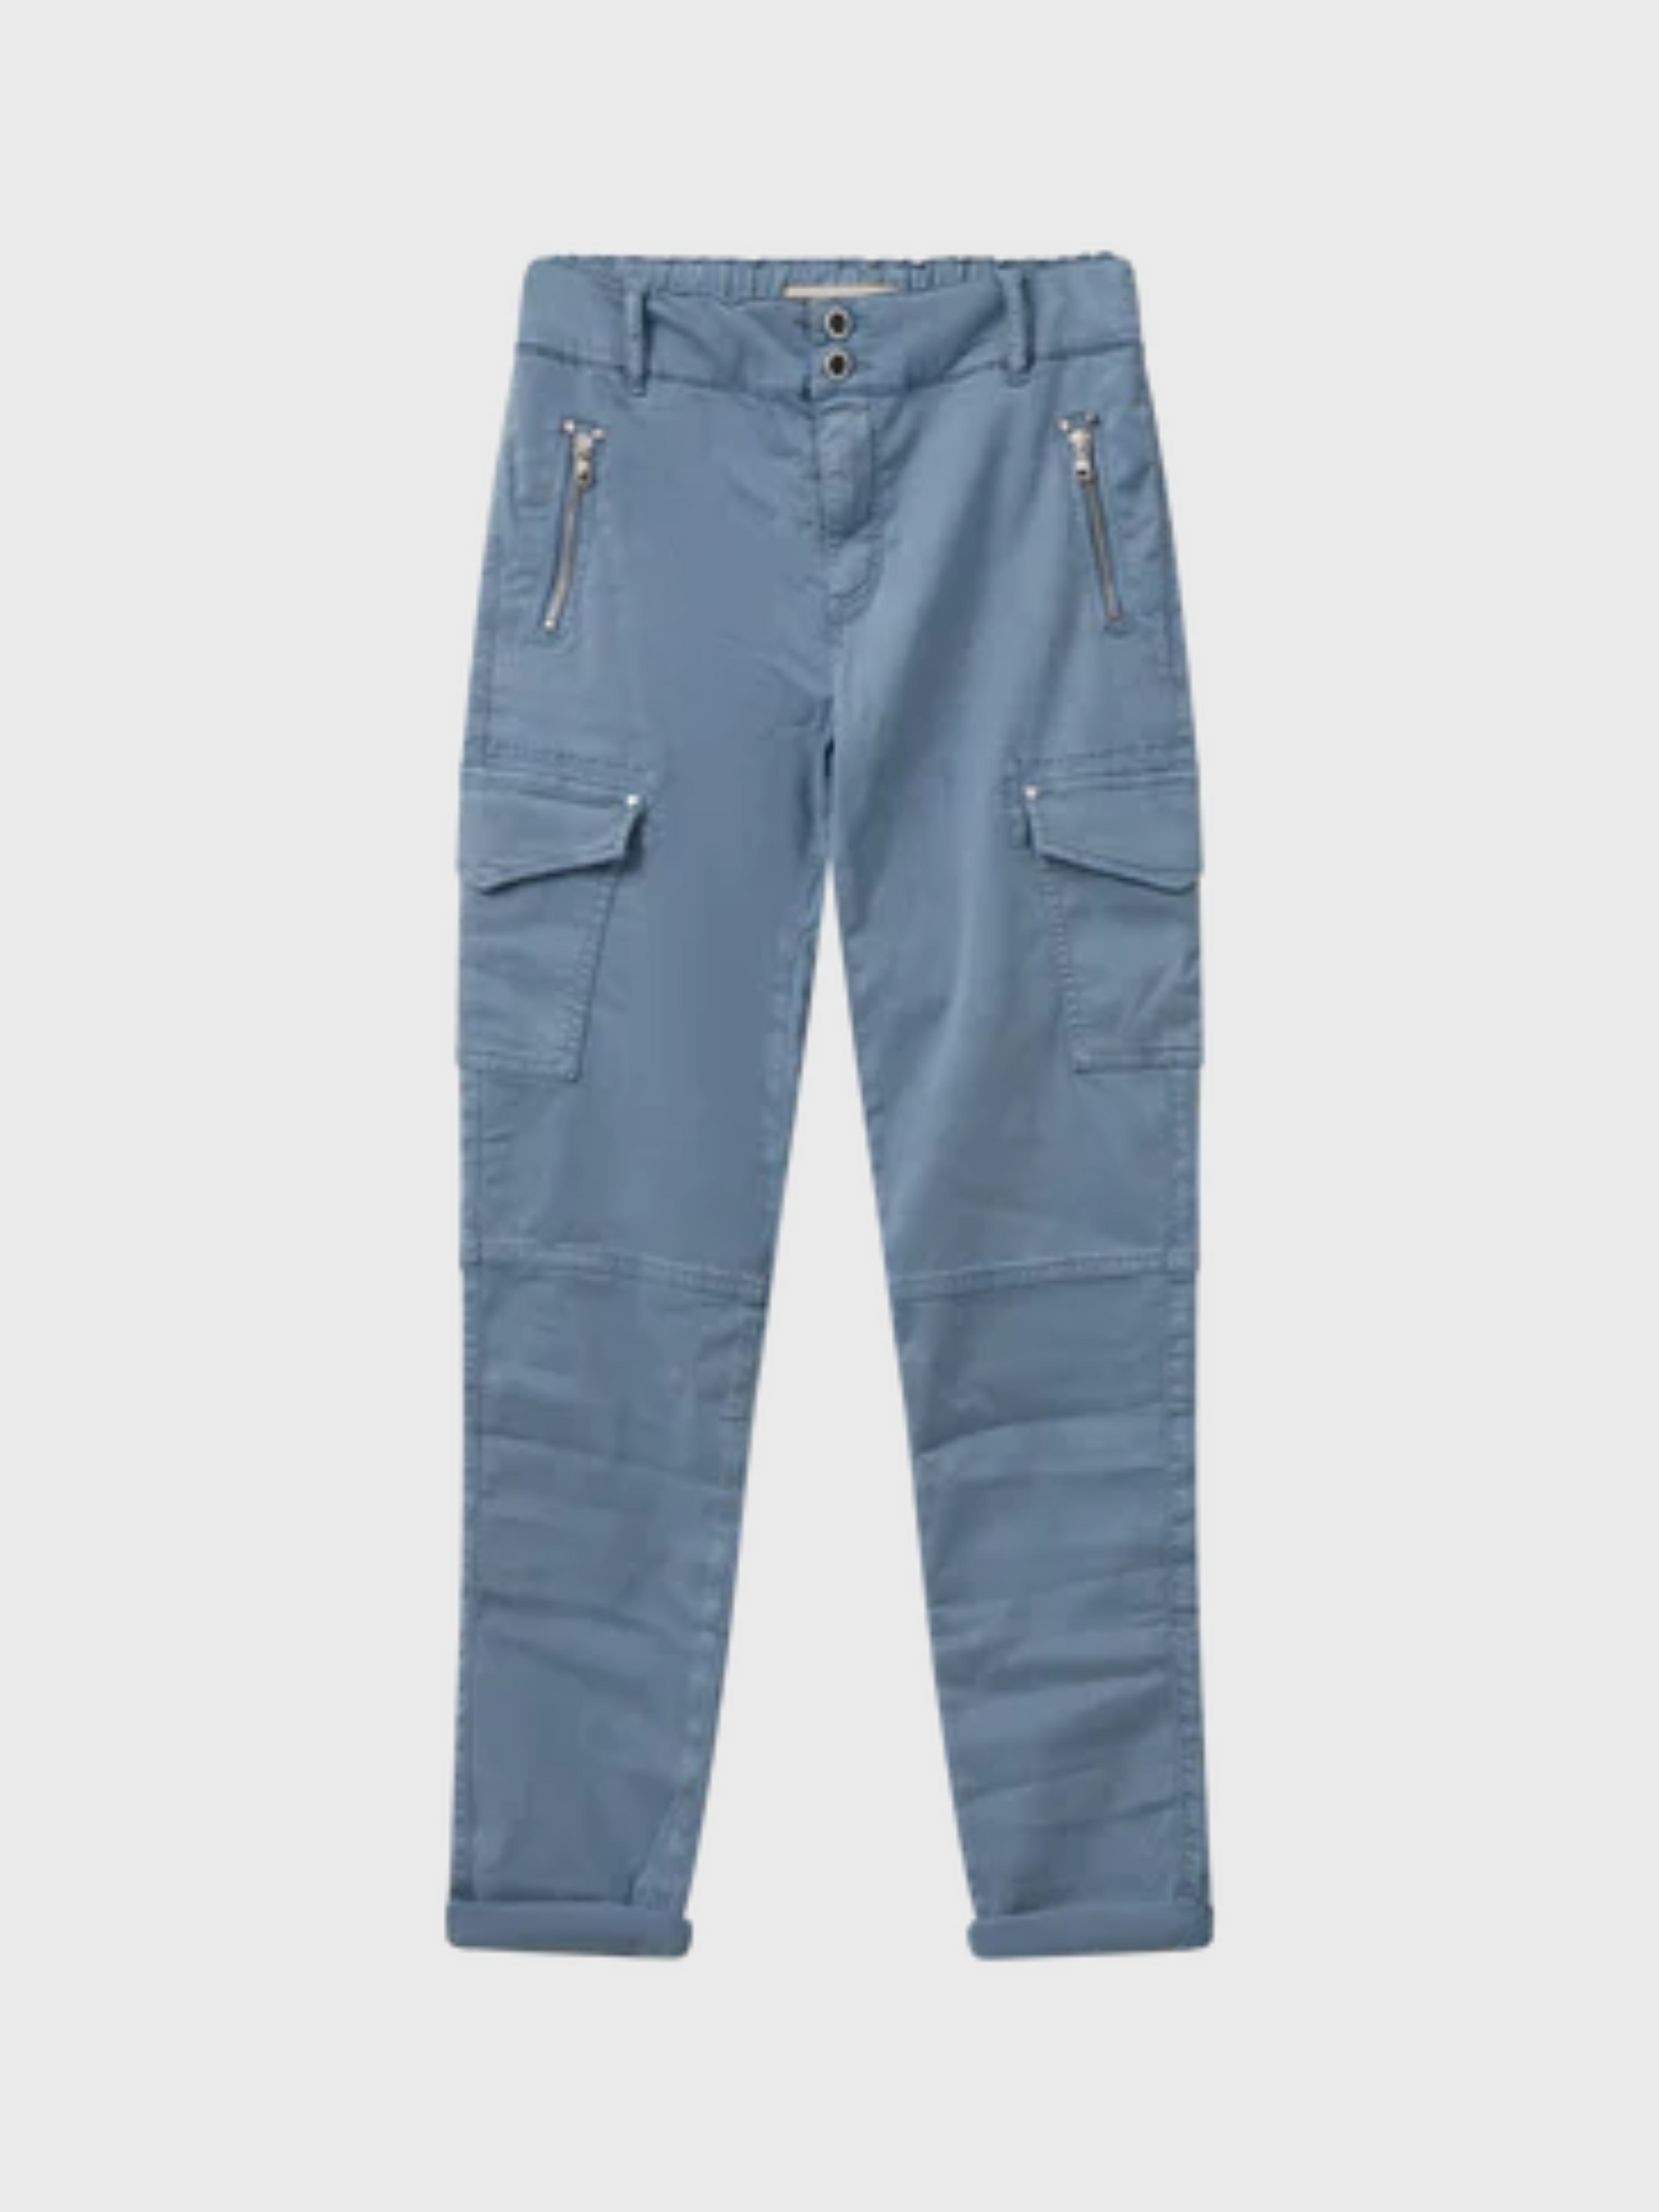 Mos Mosh Gilles Timaf Pant Blue Shadow-Pants-West of Woodward Boutique-Vancouver-Canada